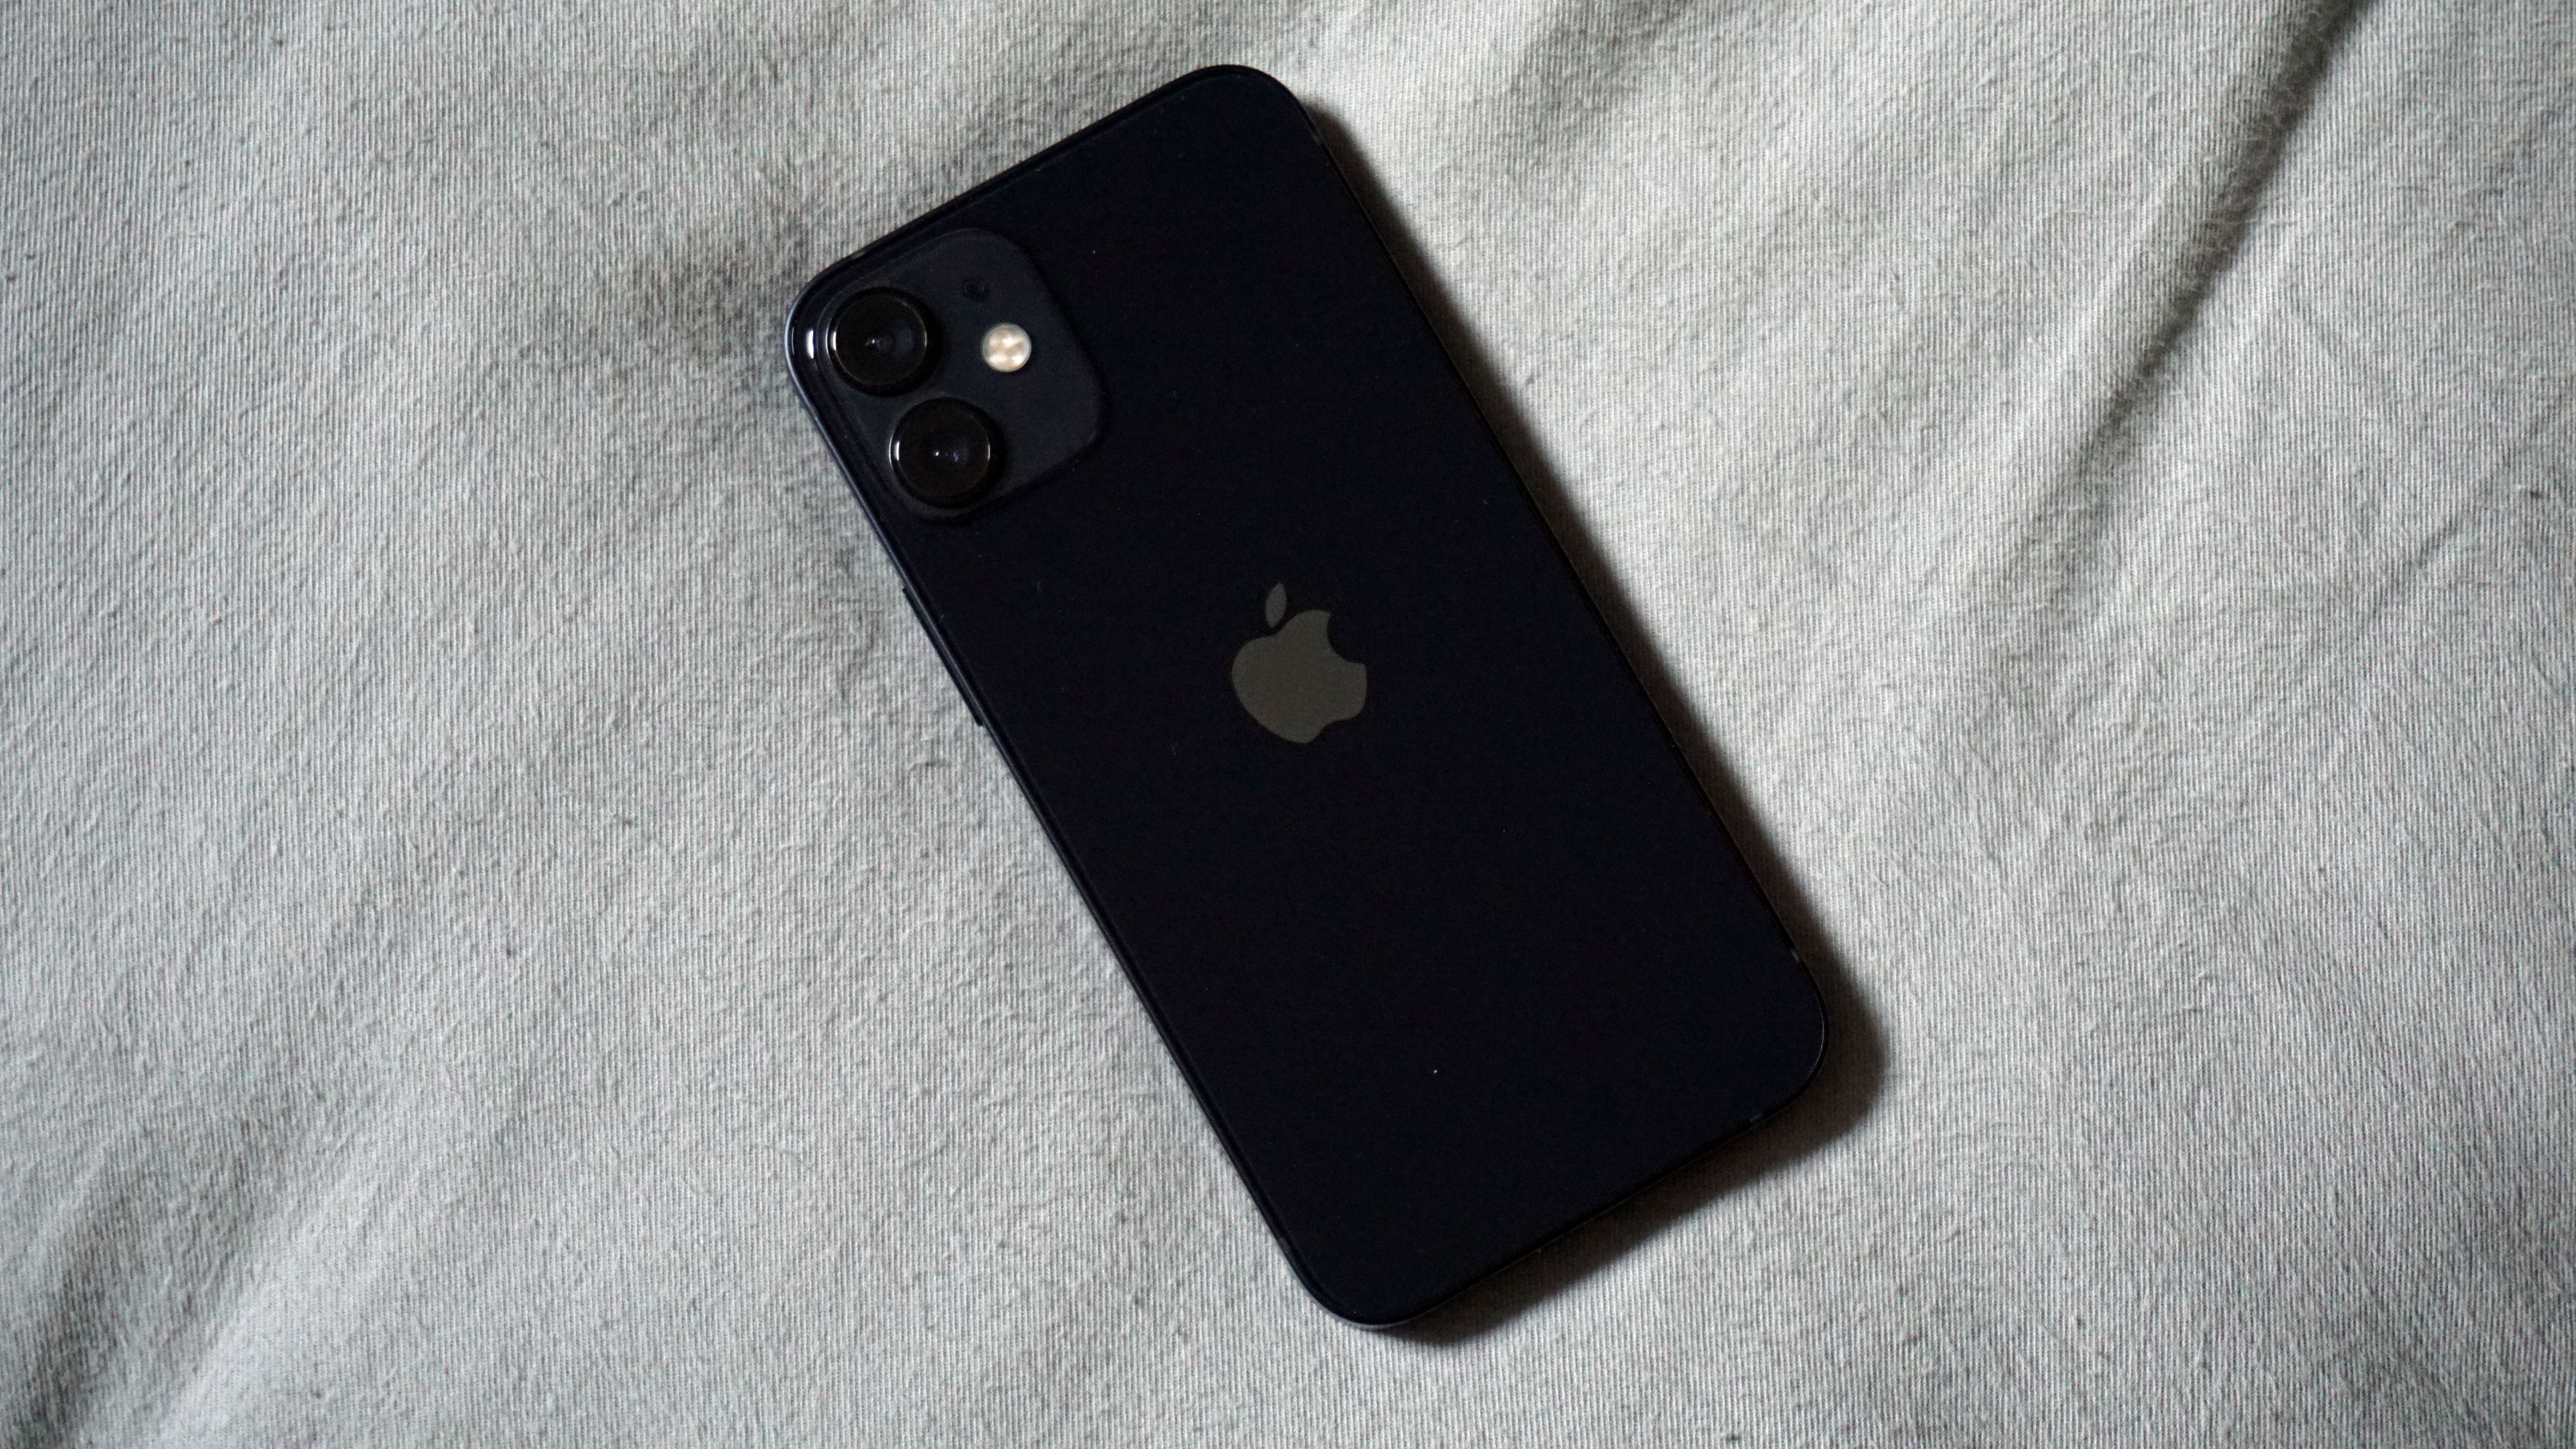 A black iPhone 12 mini, from the back